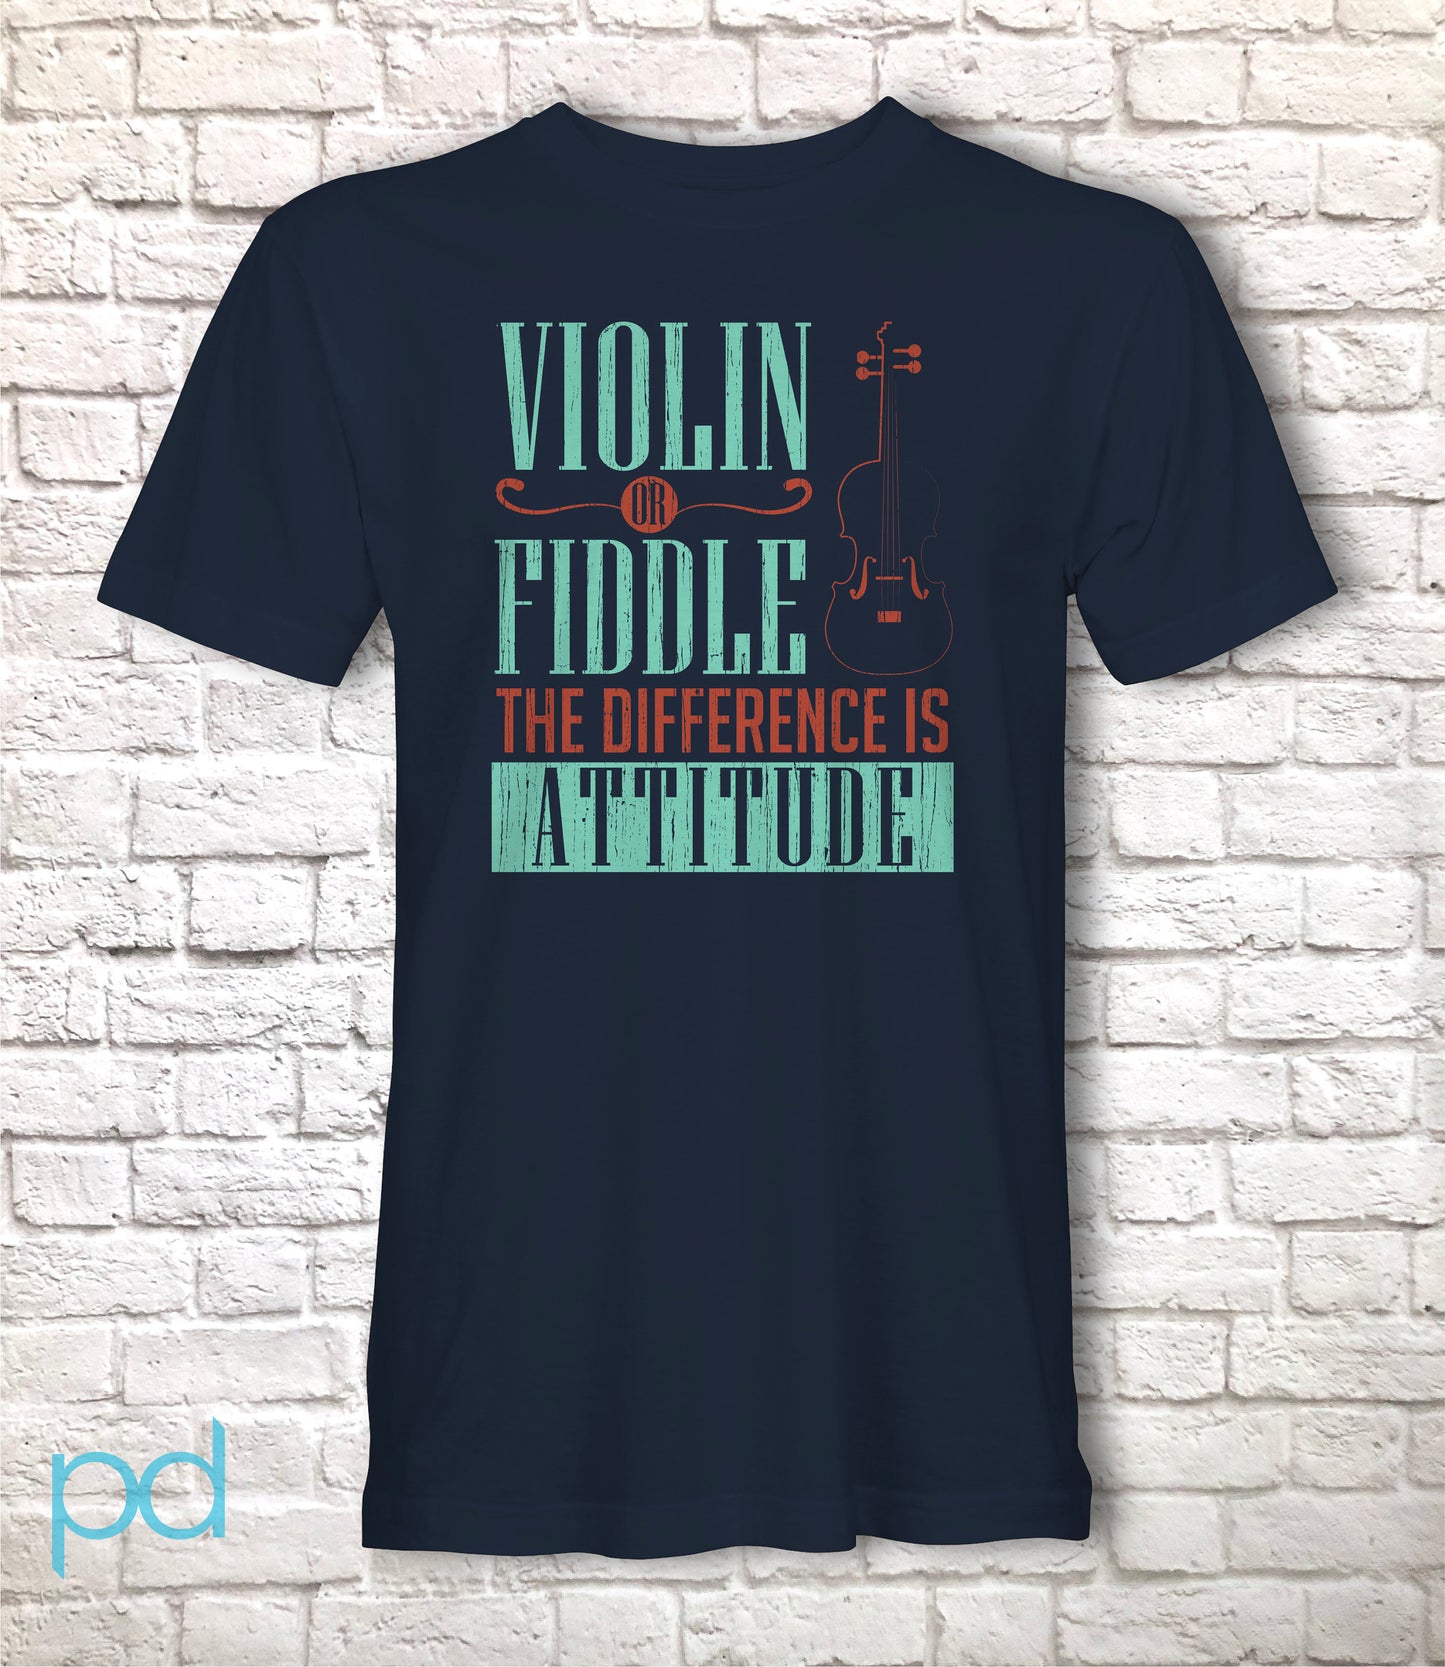 Funny Violin T-Shirt, Violinist Fiddle Player Gift Idea Tee Shirt Top, Violin or Fiddle Dilemma The Difference Is Attitude